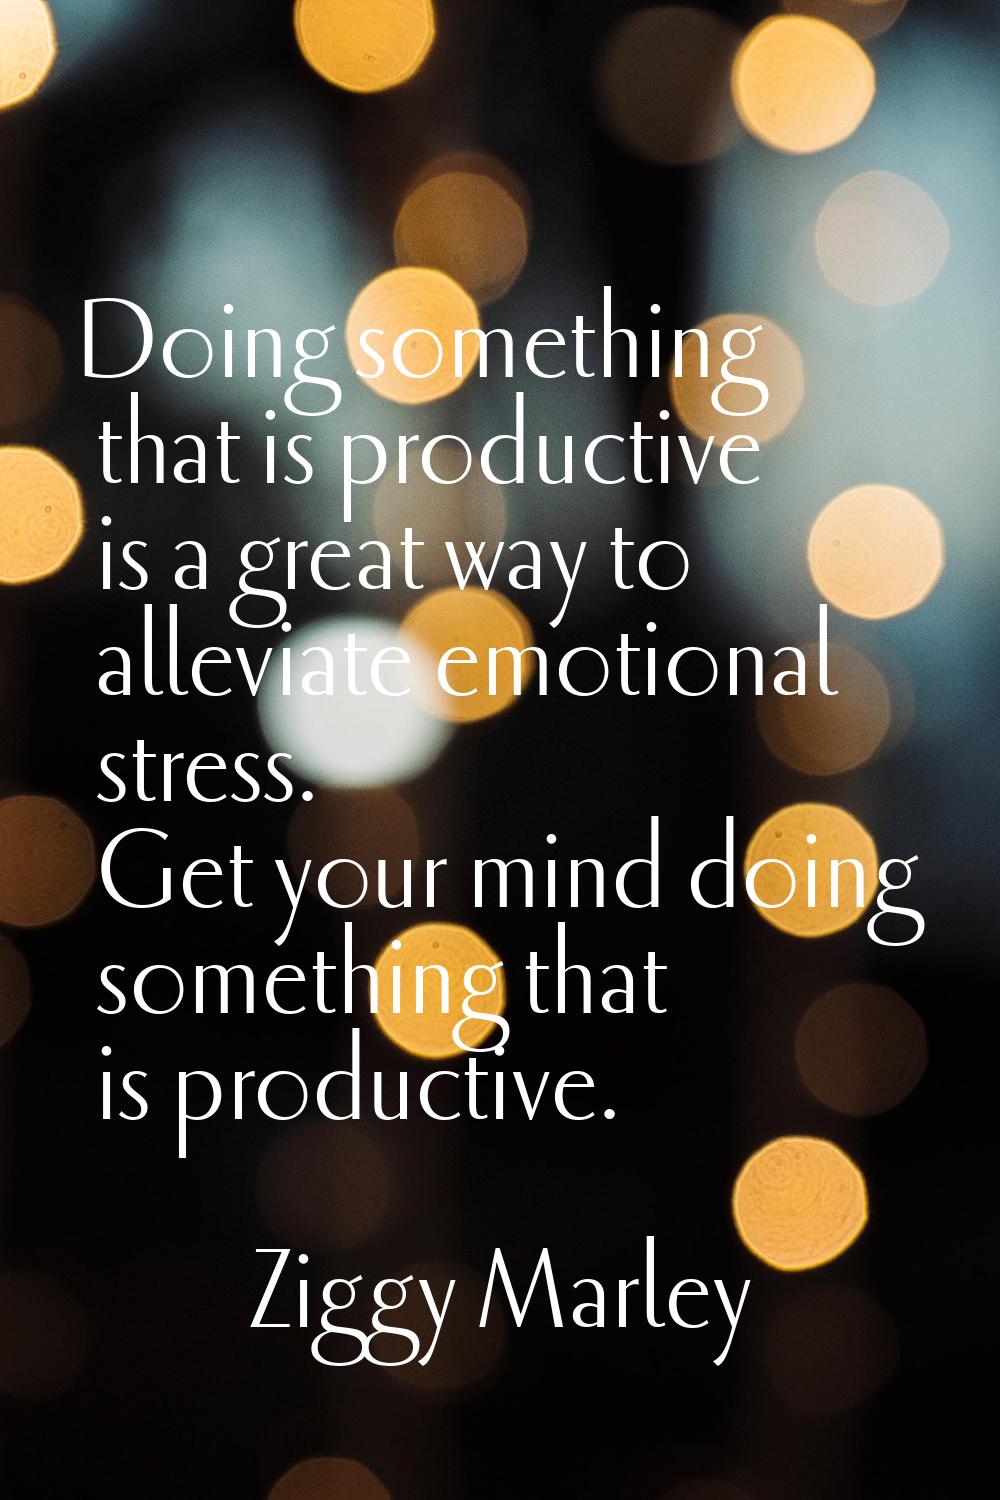 Doing something that is productive is a great way to alleviate emotional stress. Get your mind doin